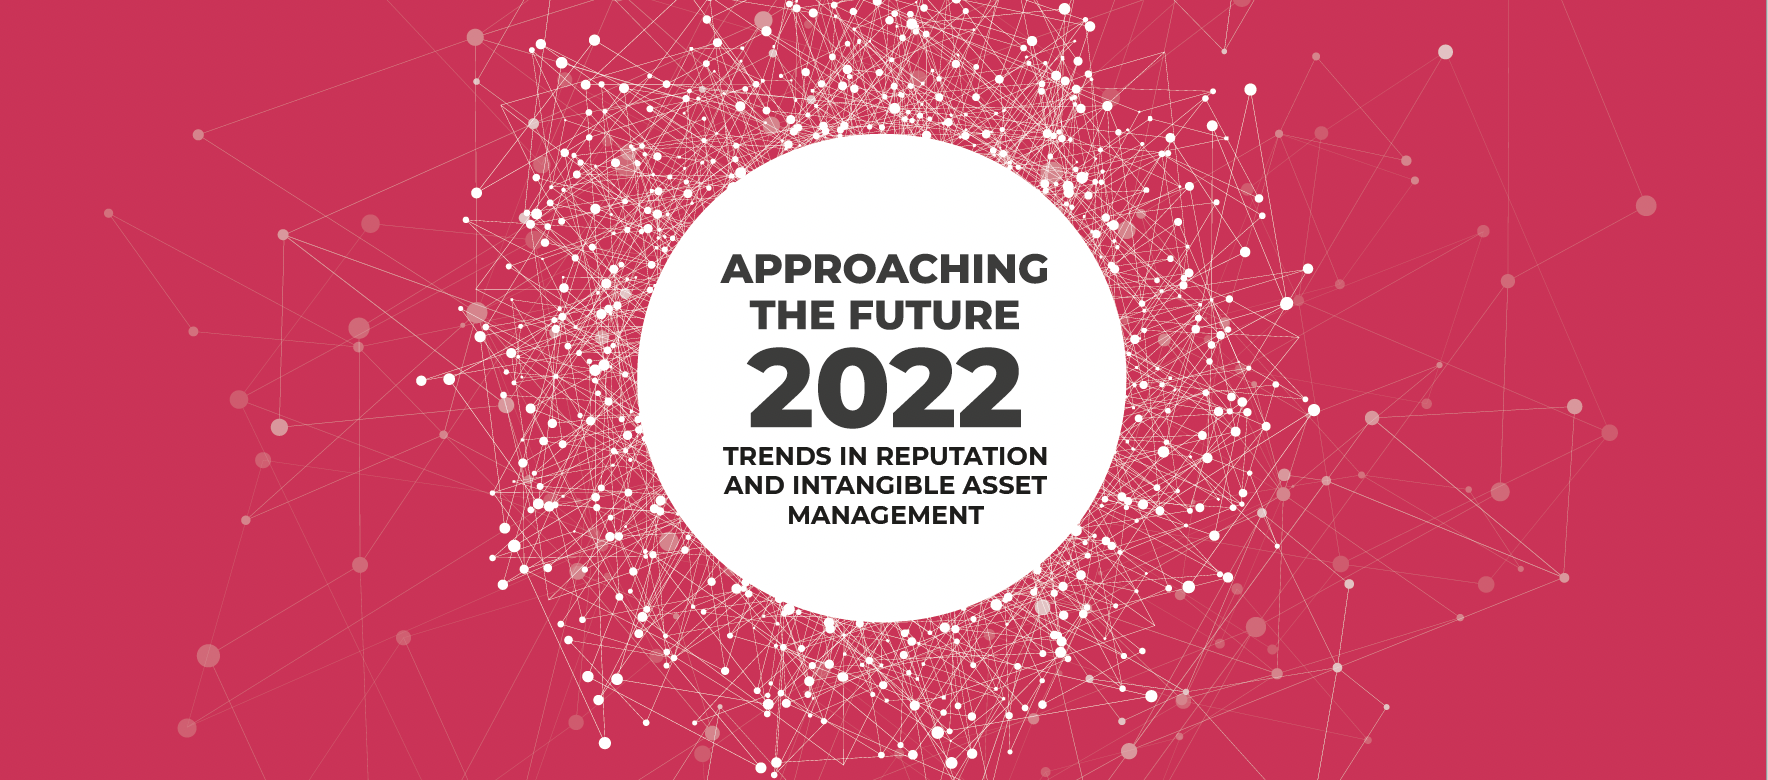 Approaching the Future 2022 Report. Trends in Reputation and Intangible Asset Management